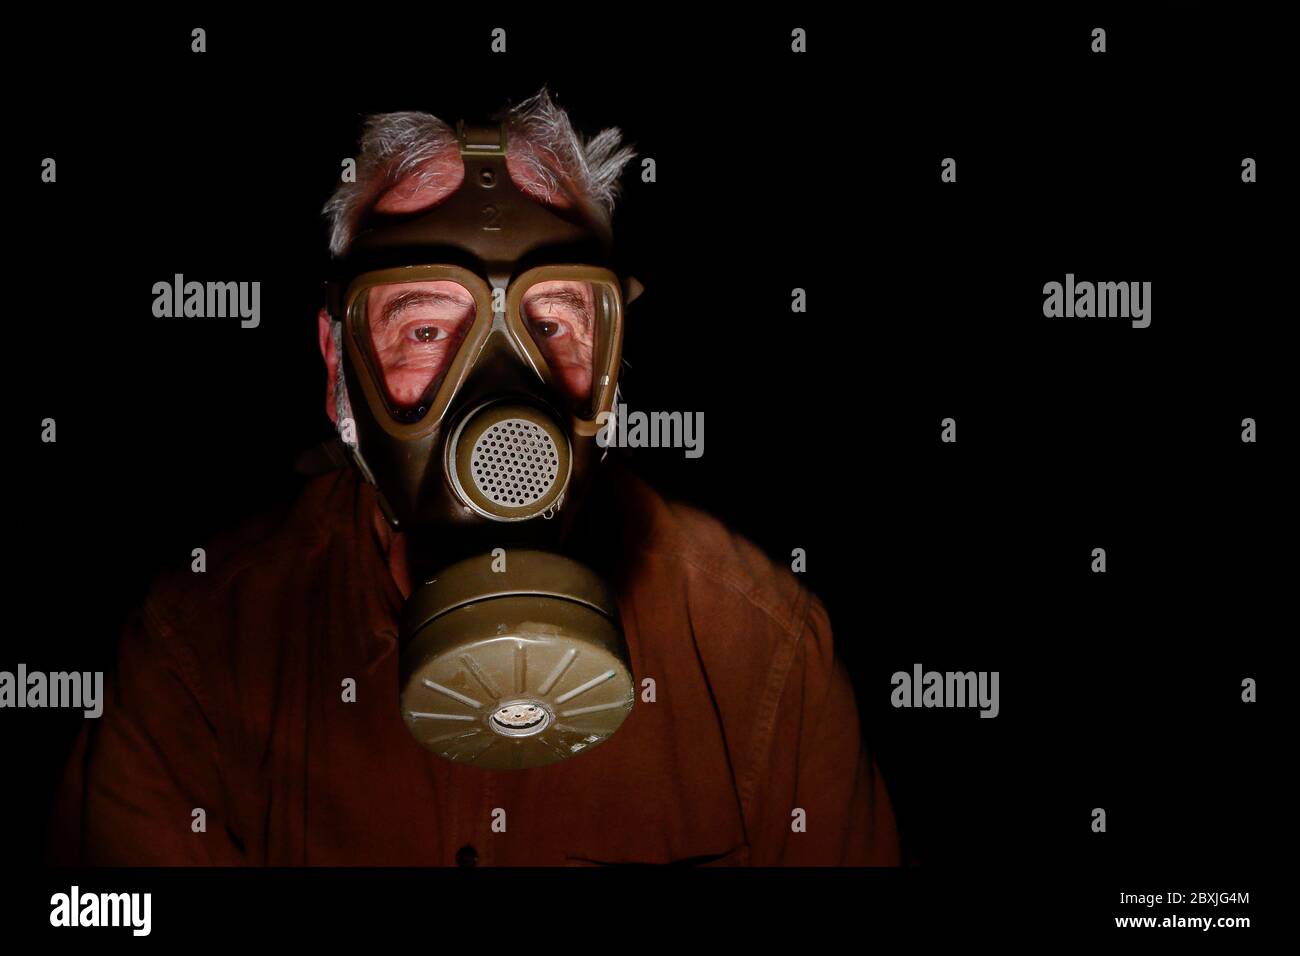 Uncertain times. Fearing the coronavirus, an older man has put on his old gas mask to protect himself. Stock Photo